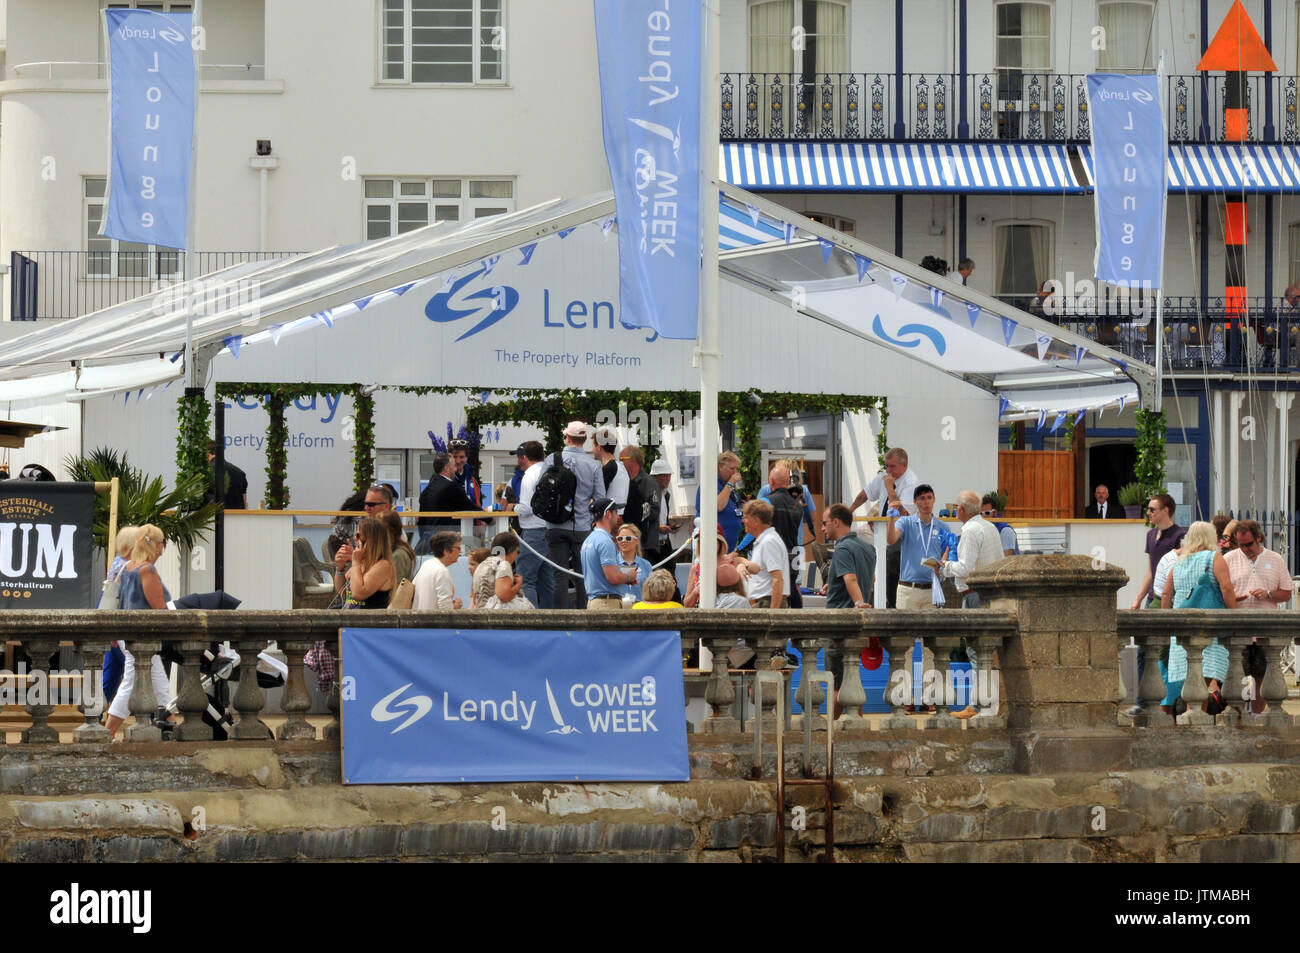 yachts yachting crowds and spectators atmosphere at cowes week on the isle of wight sailing boating regattas visitors tourists and competitors Stock Photo